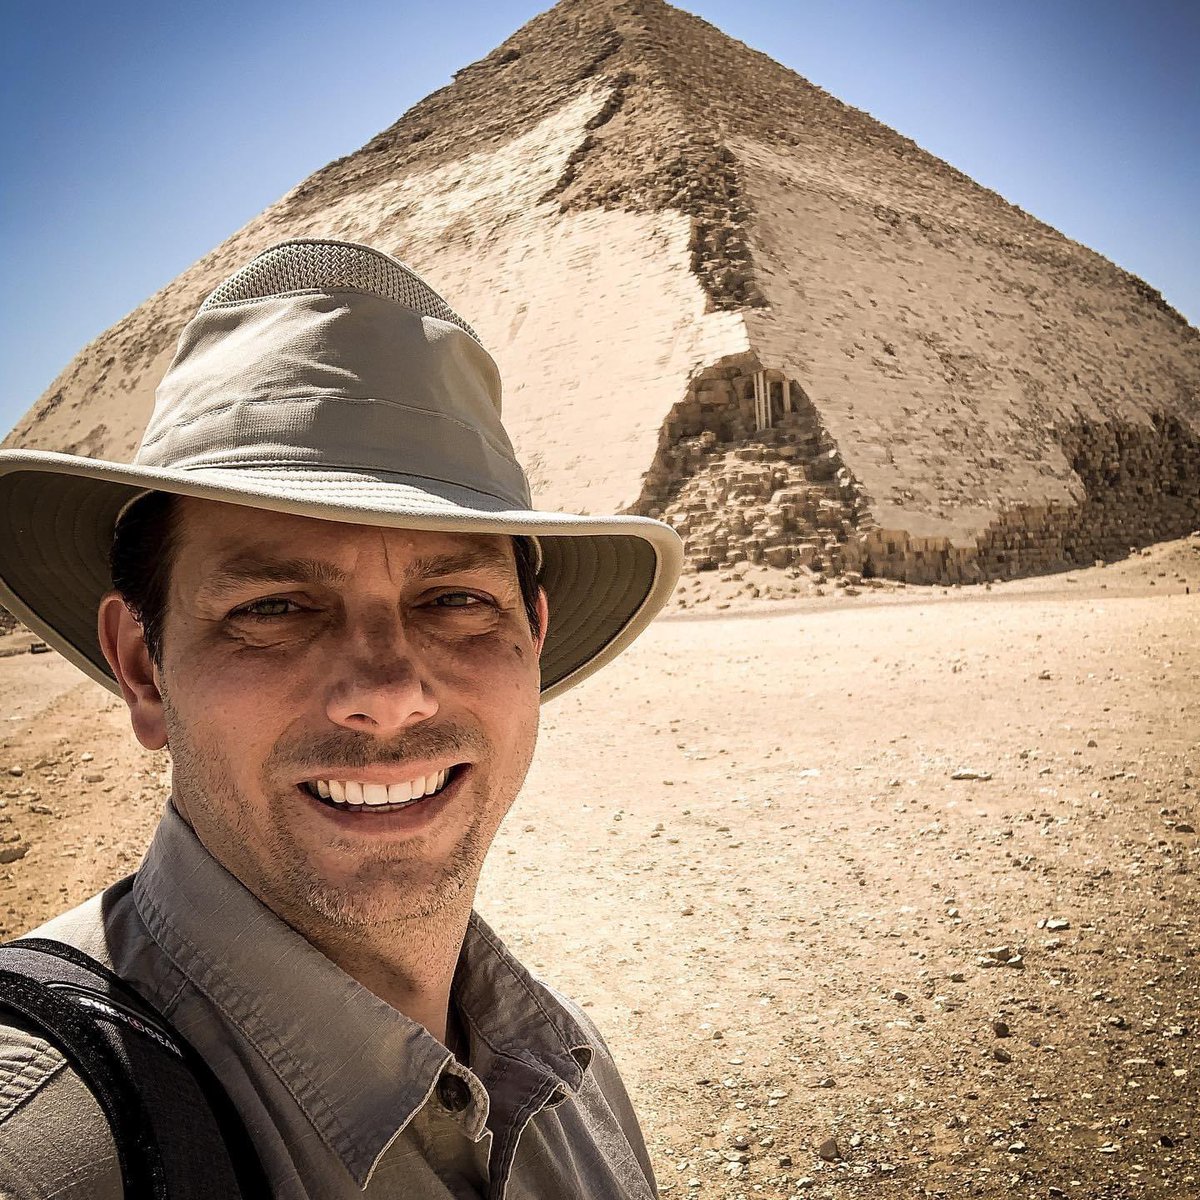 What’s the best way to keep up with my forthcoming adventure in Egypt over the next two weeks? Written blog: connecteduniverse.substack.com Video blog: connecteduniverseportal.com #egypt #ancient #travel #blog